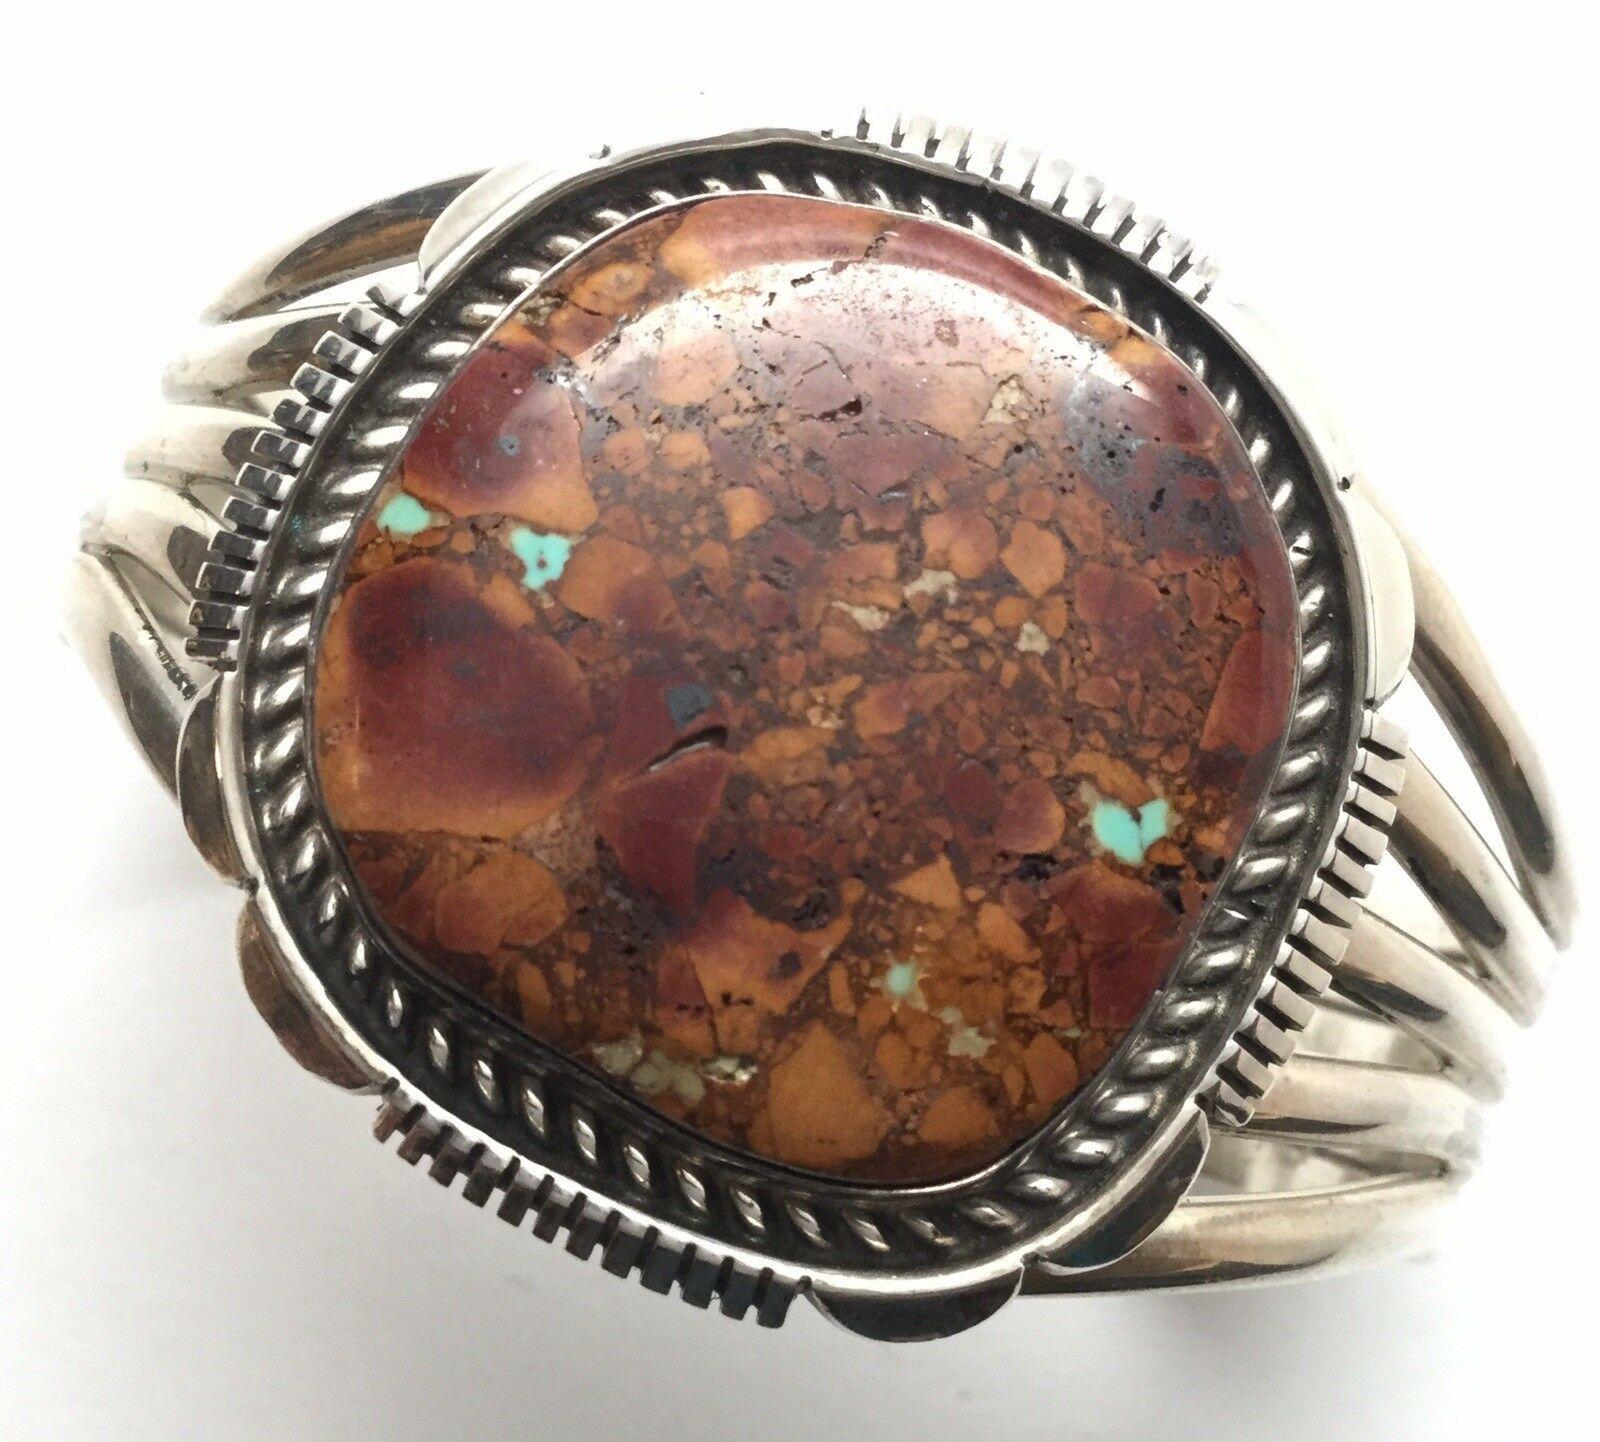 Native American sterling silver cuff bracelet with natural ocean jasper of red and turquoise.

Marked: Sterling,
Piece has artisan initials, but hard to see due in being blocked by band.

Measures: 5 1/2